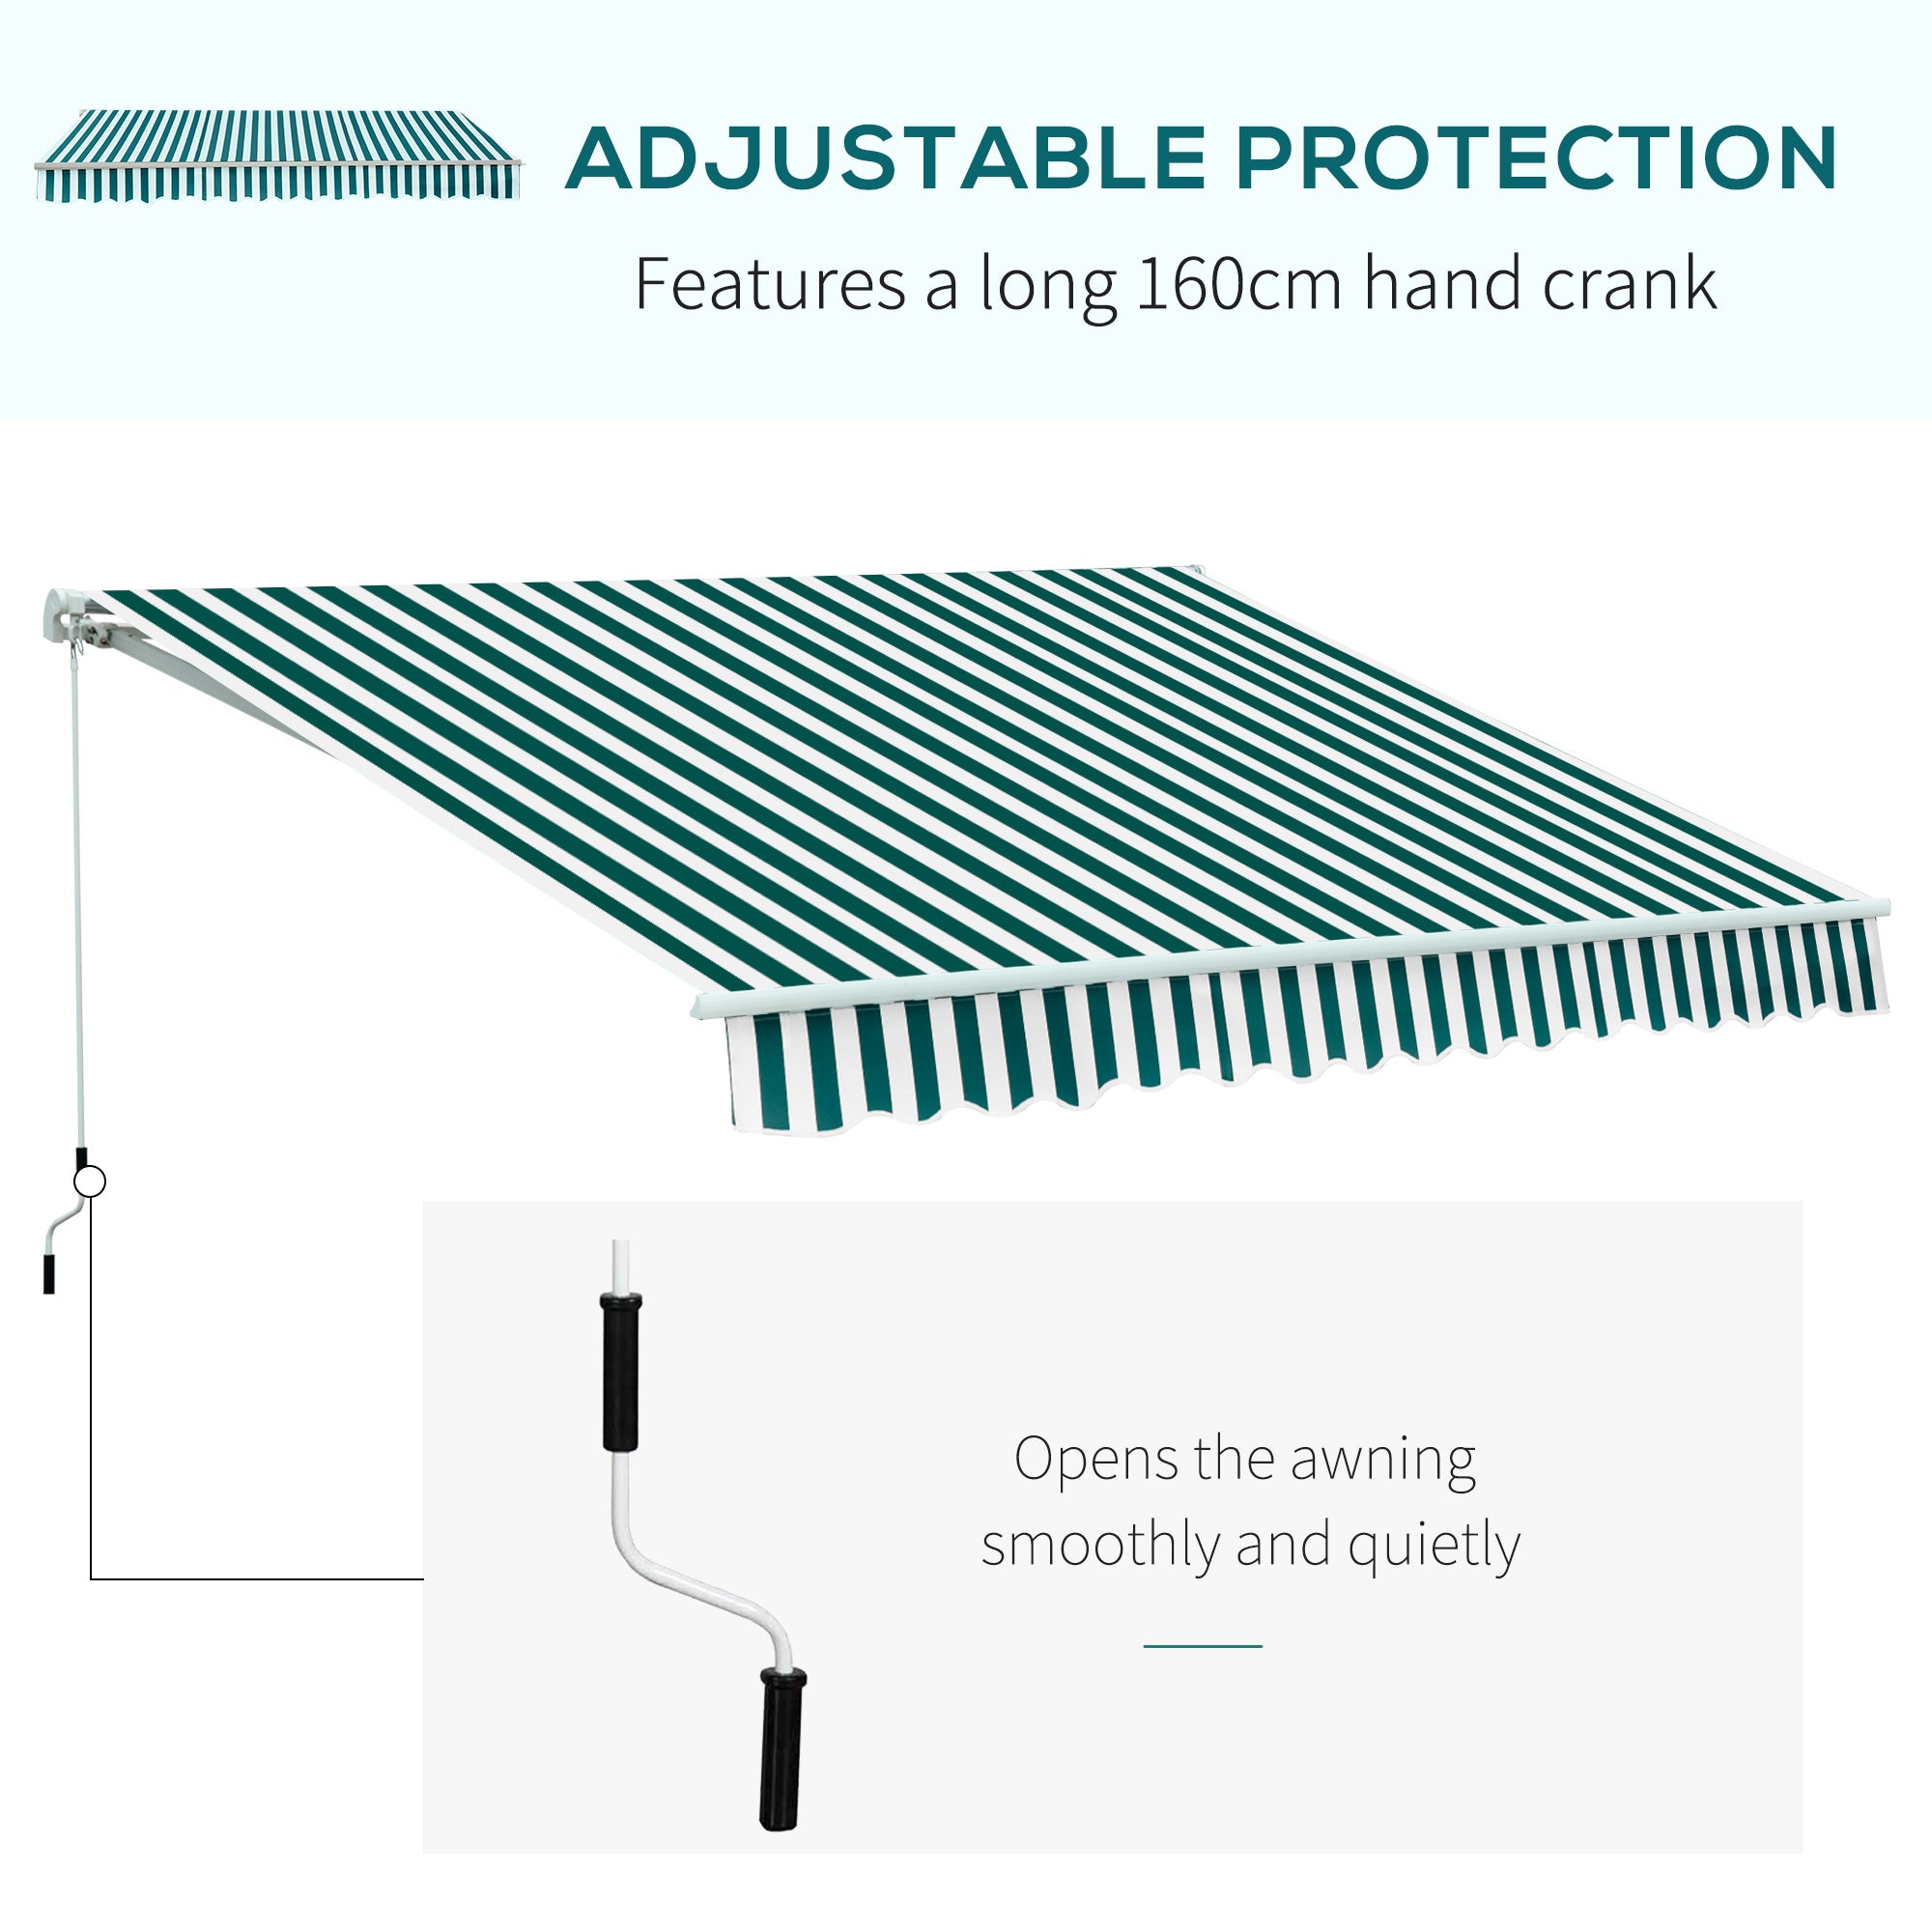 HOMCOM 3.5 x 2.5m Garden Patio Manual Awning Canopy Sun Shade Shelter with New Winding Handle - Green/ White - Inspirely